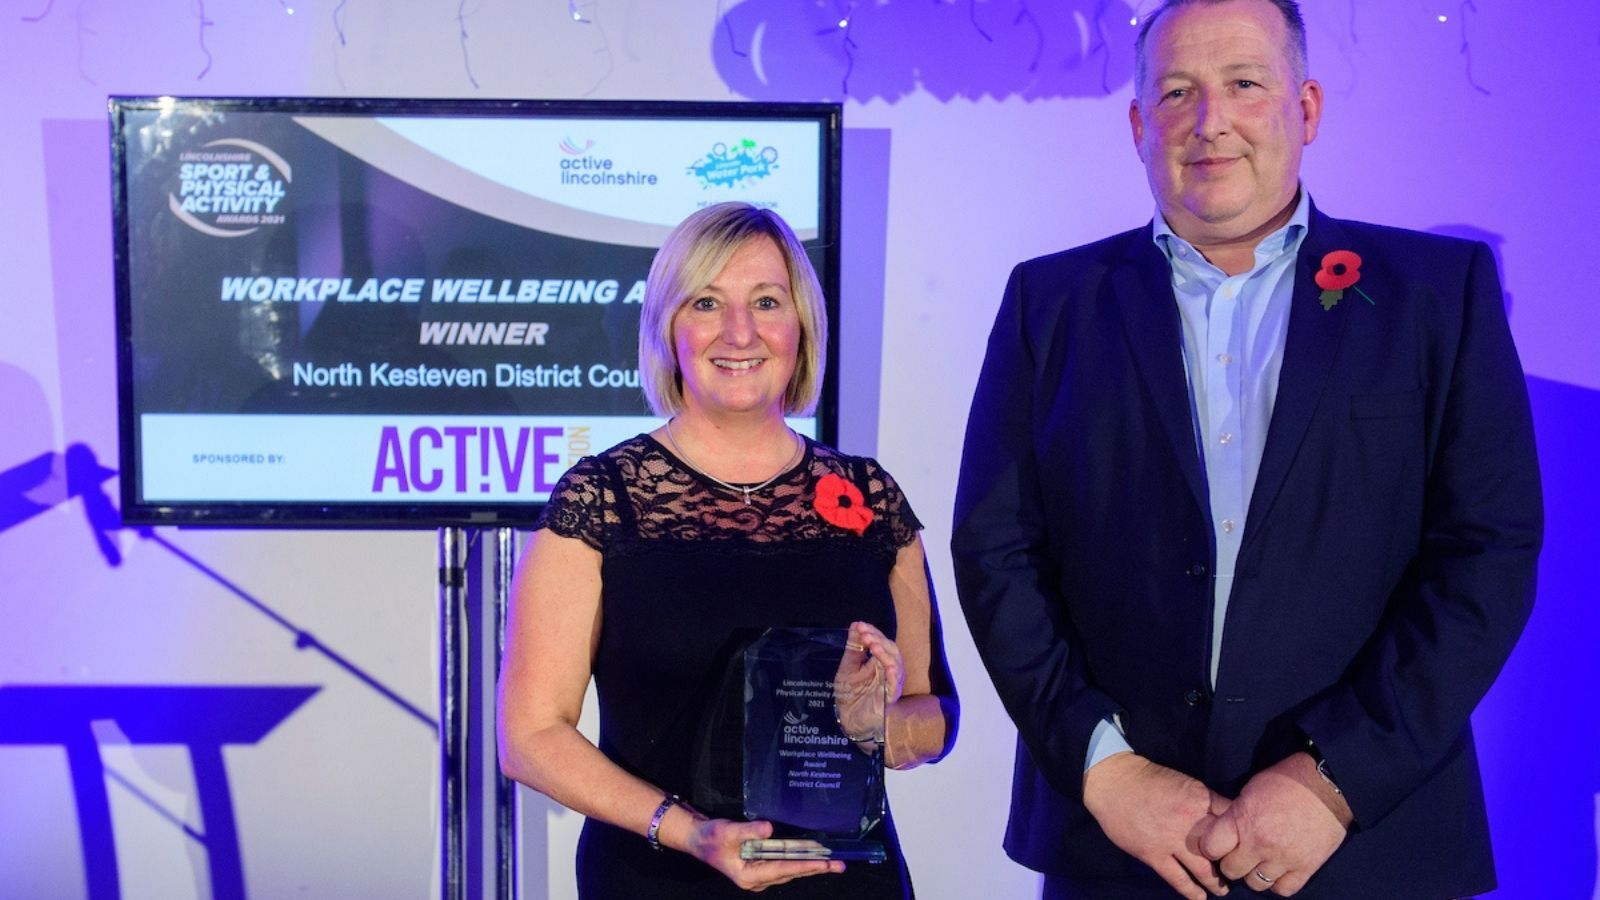 LSPAA Workplace Wellbeing Award Winner: North Kesteven District Council